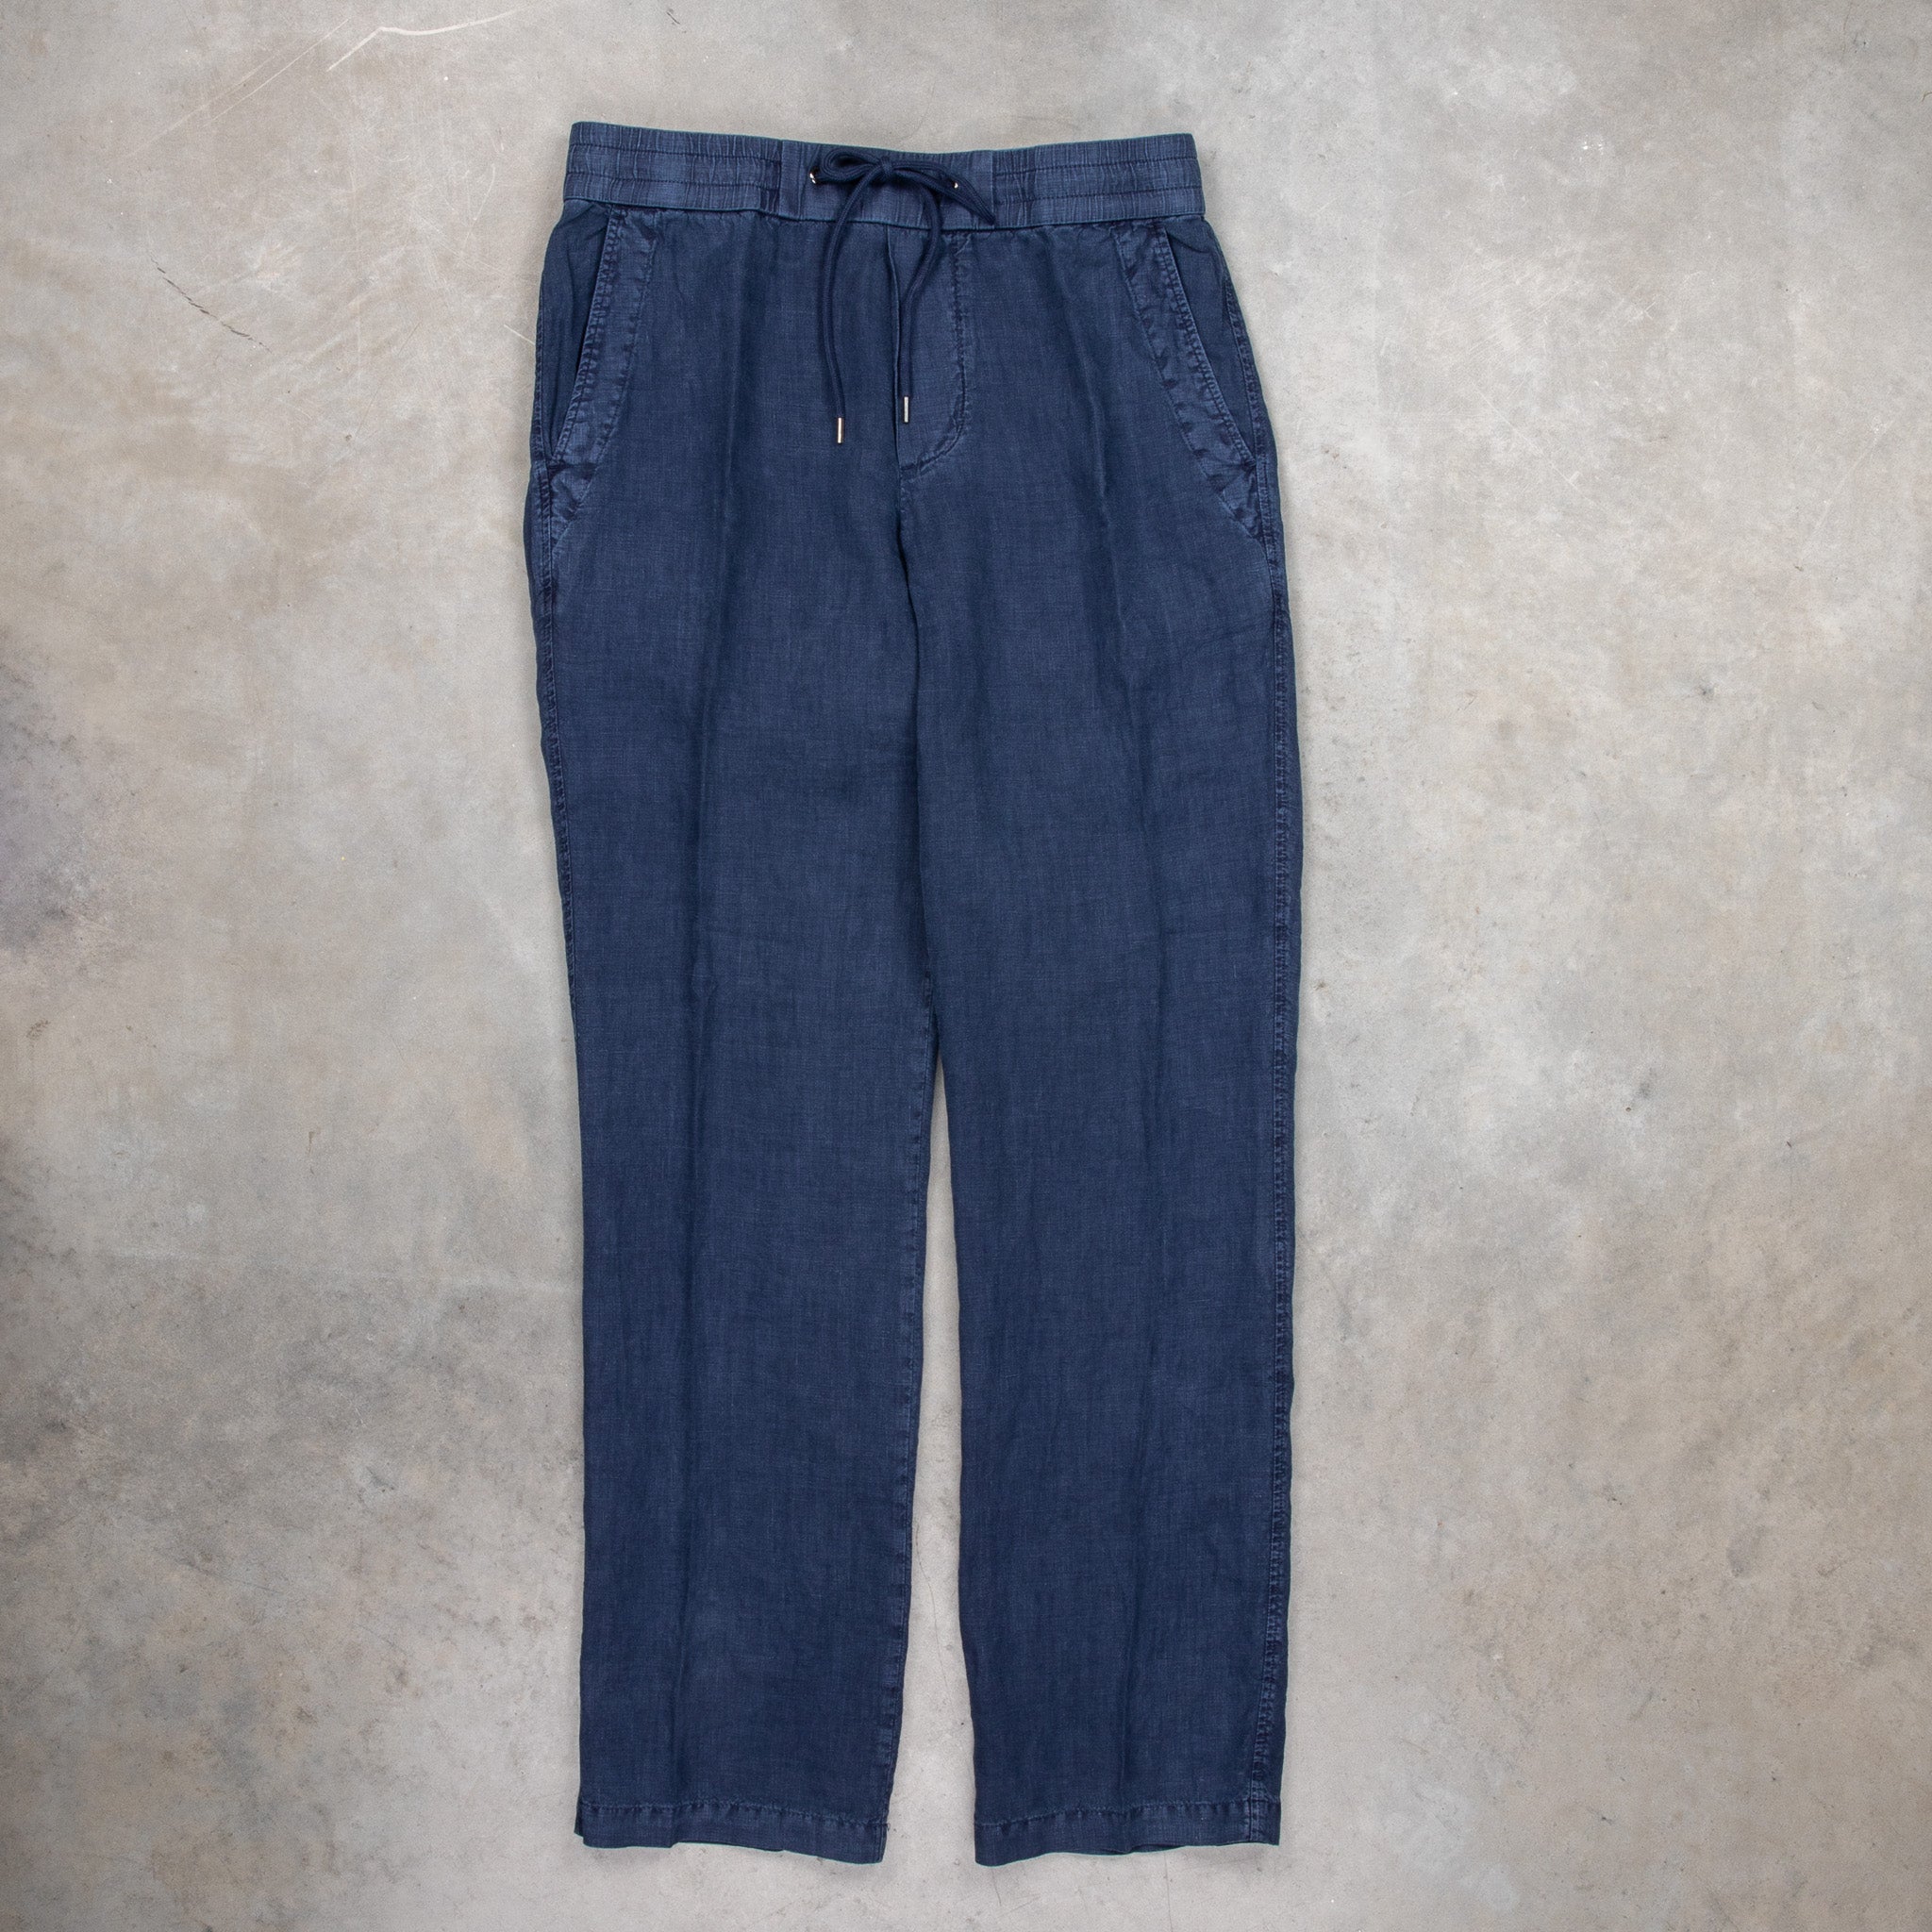 James perse Relaxed Linen Pant Imperial